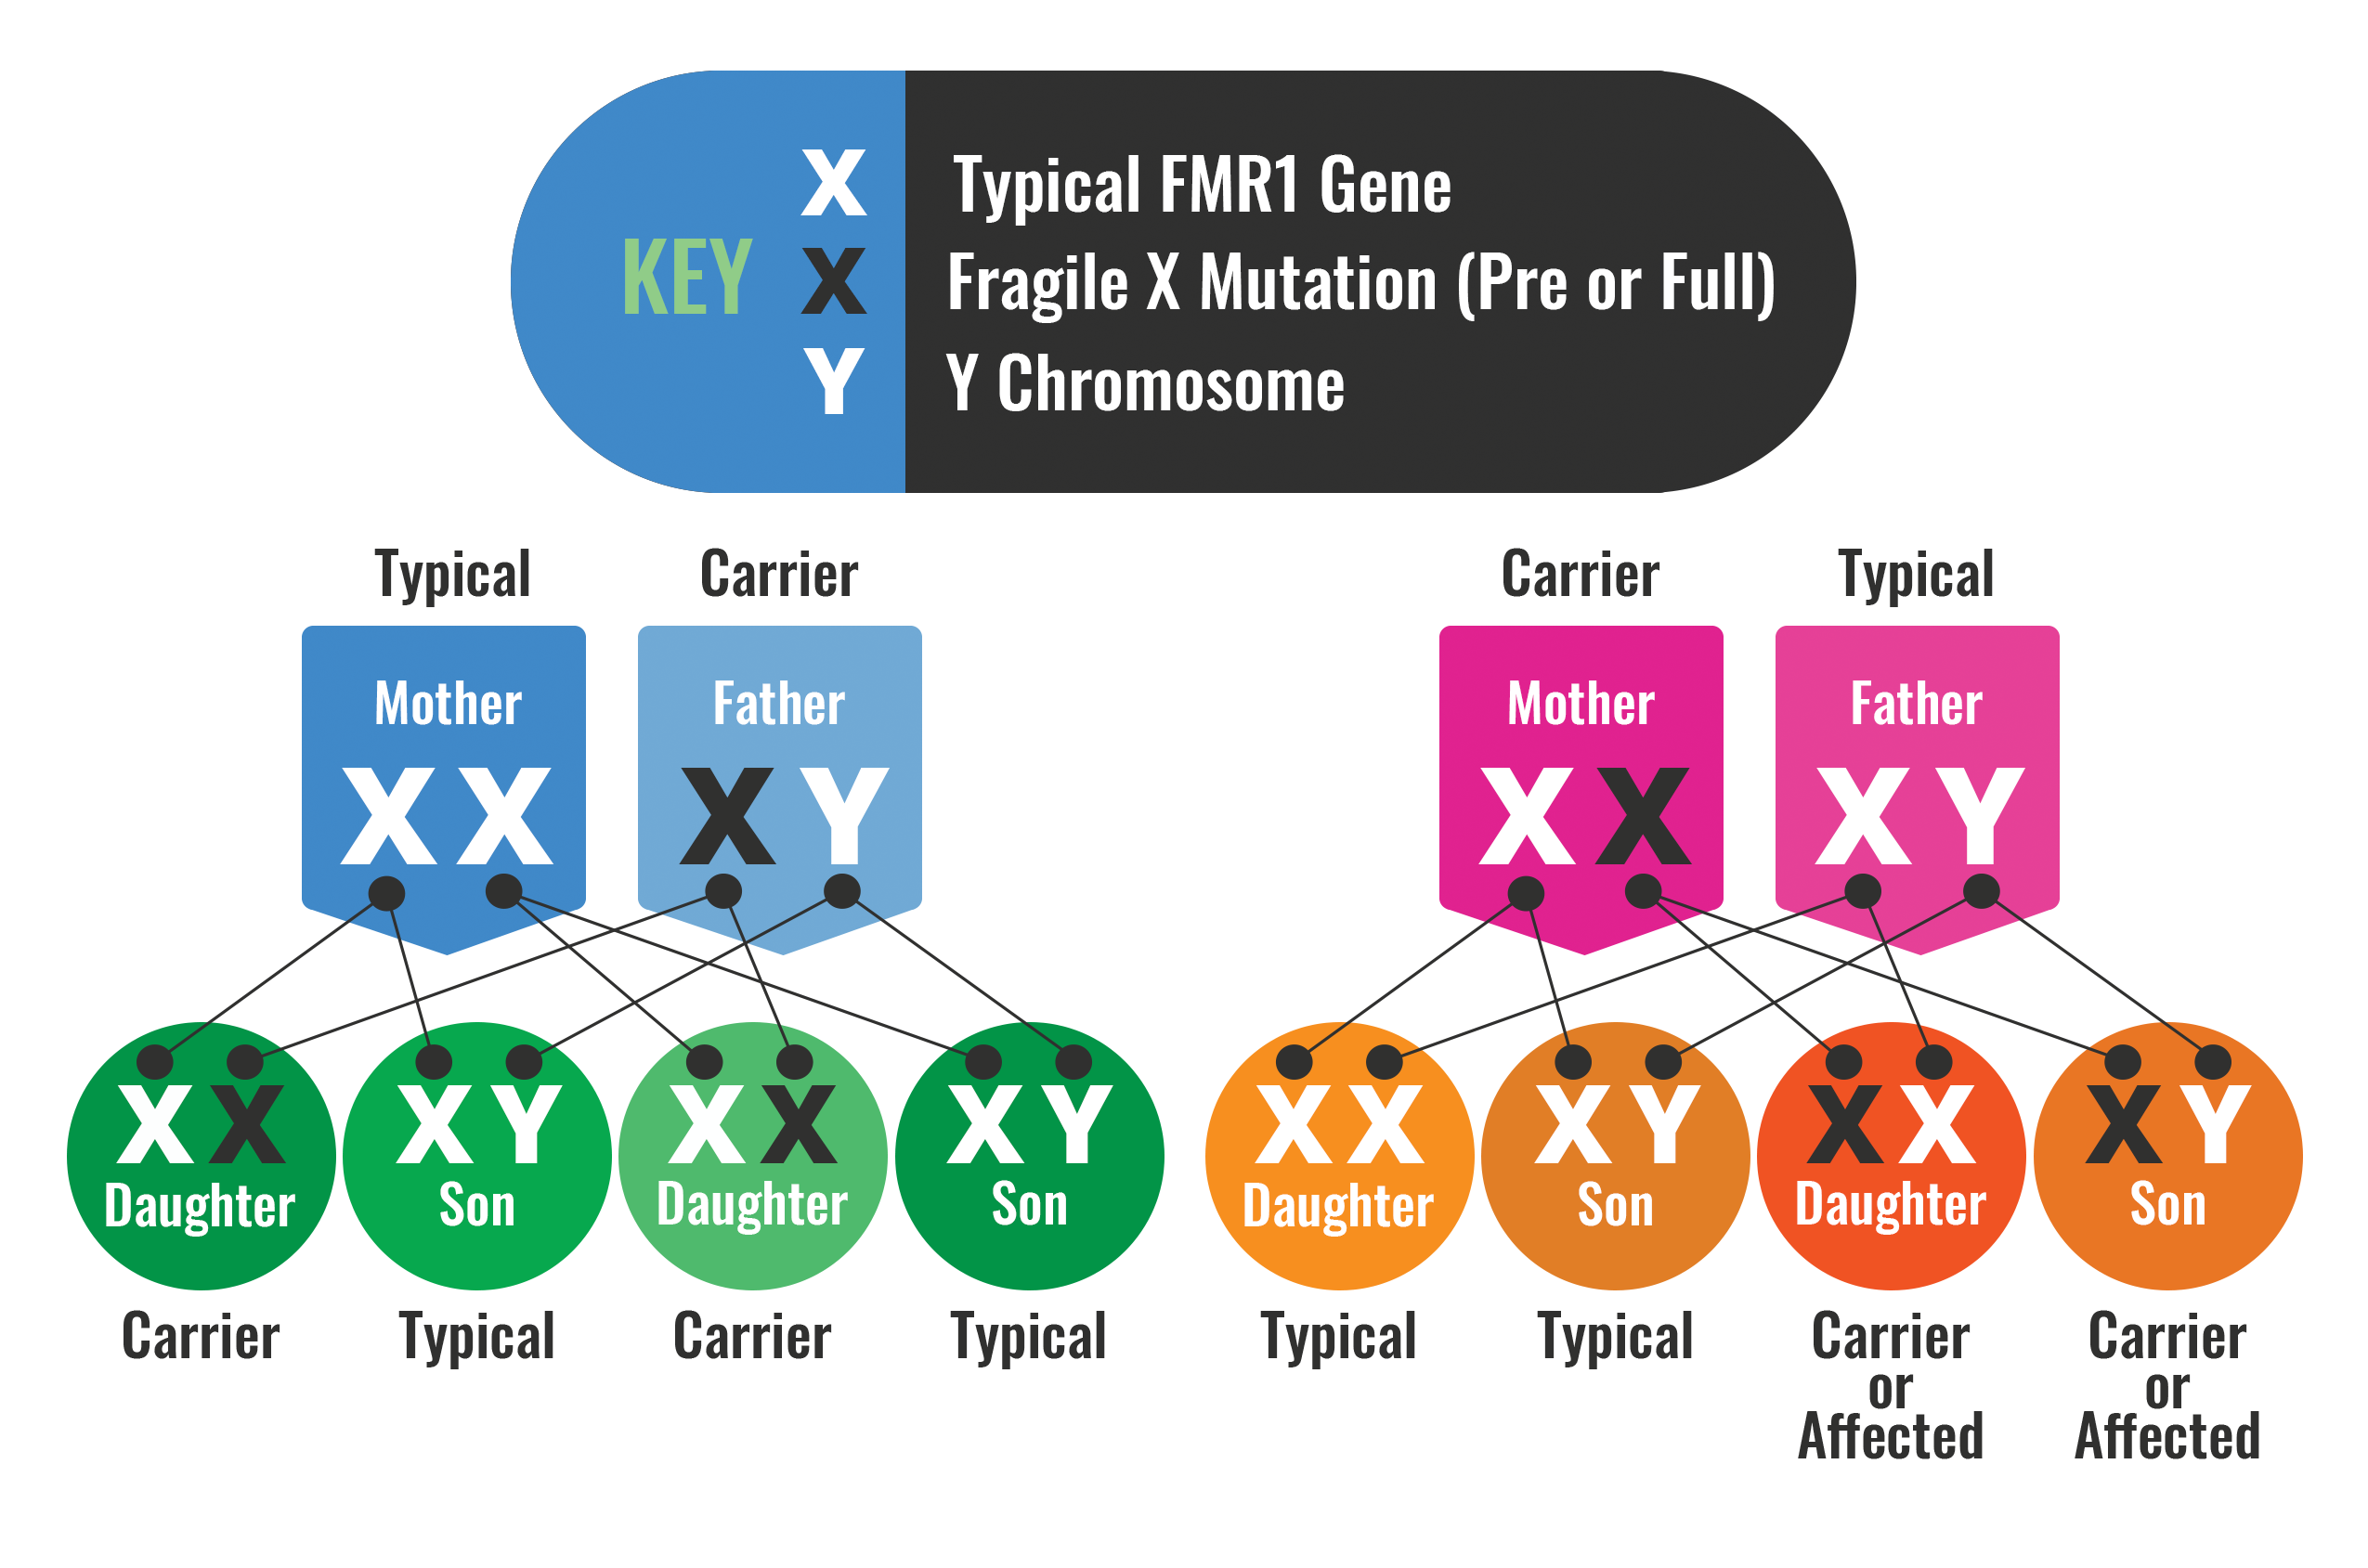 How is Fragile X inherited